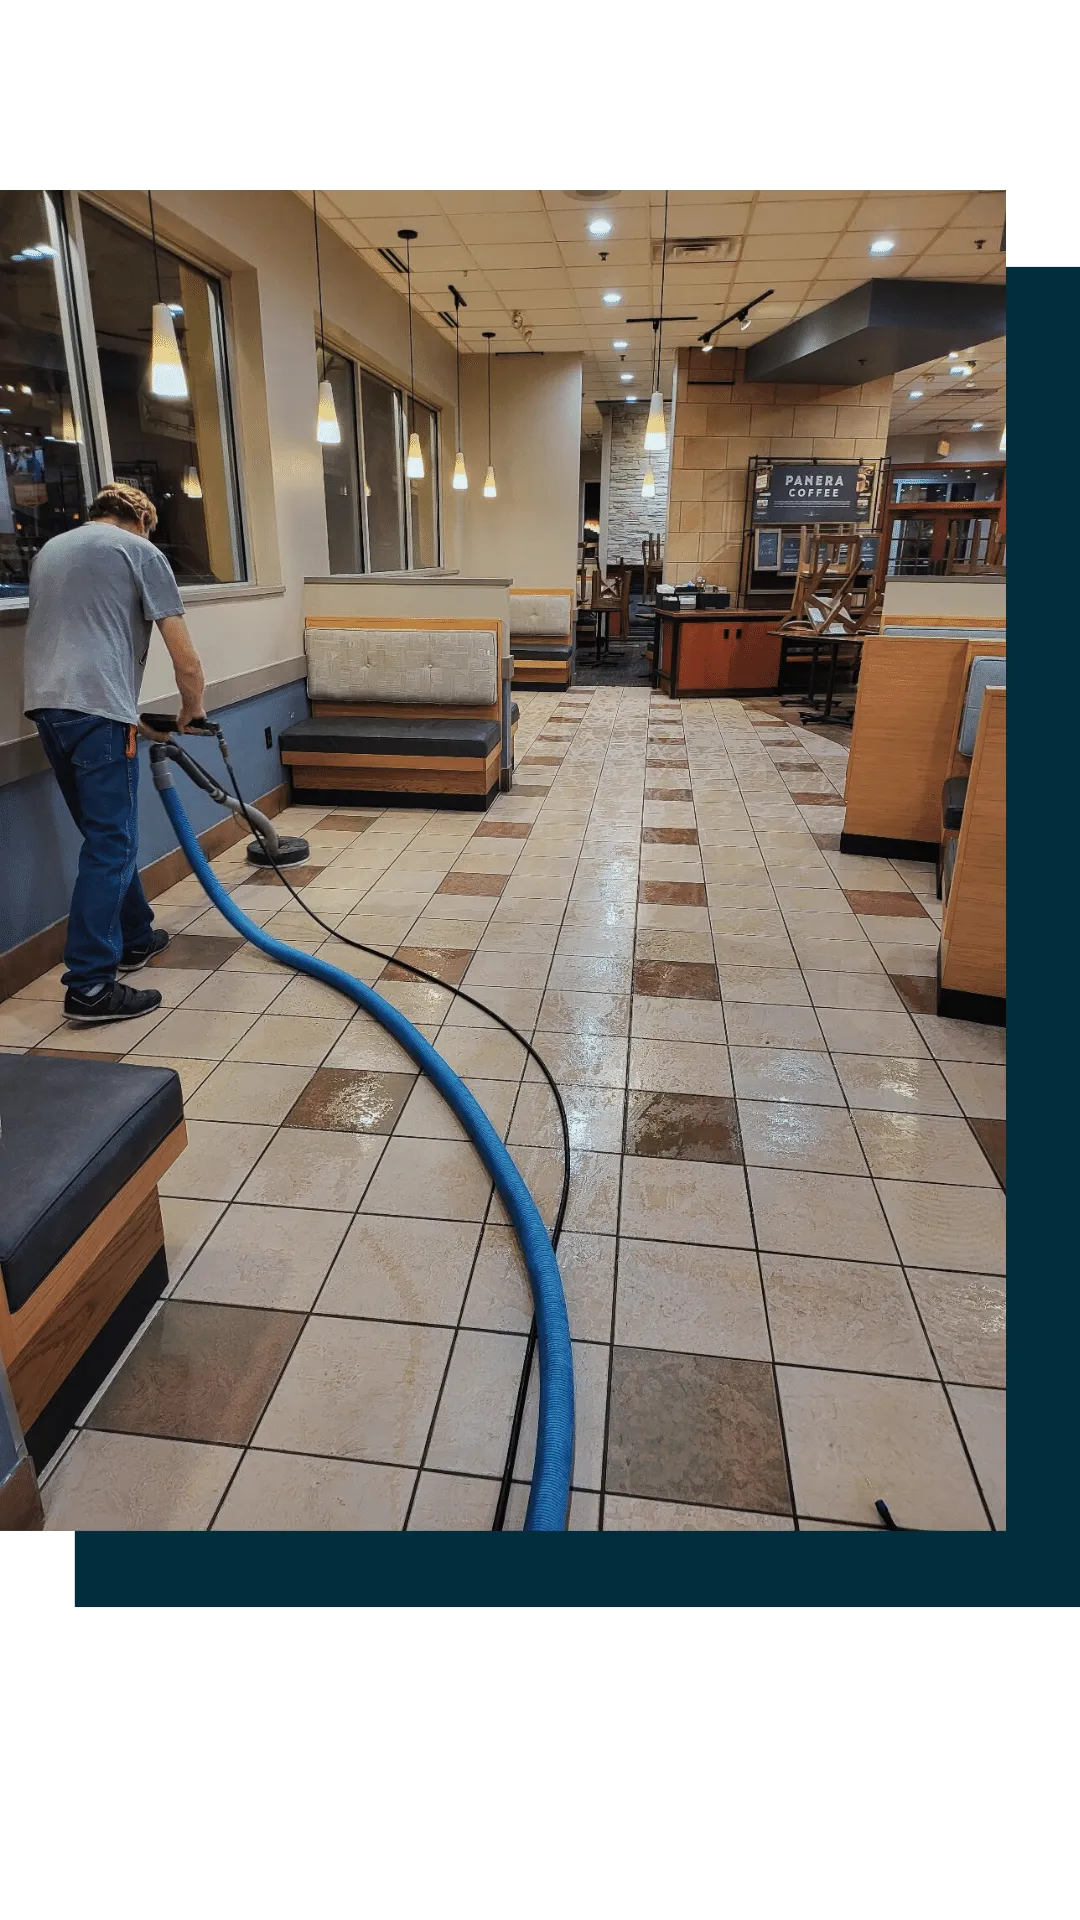 New Way technician deep cleaning high-traffic commercial tile and grout flooring